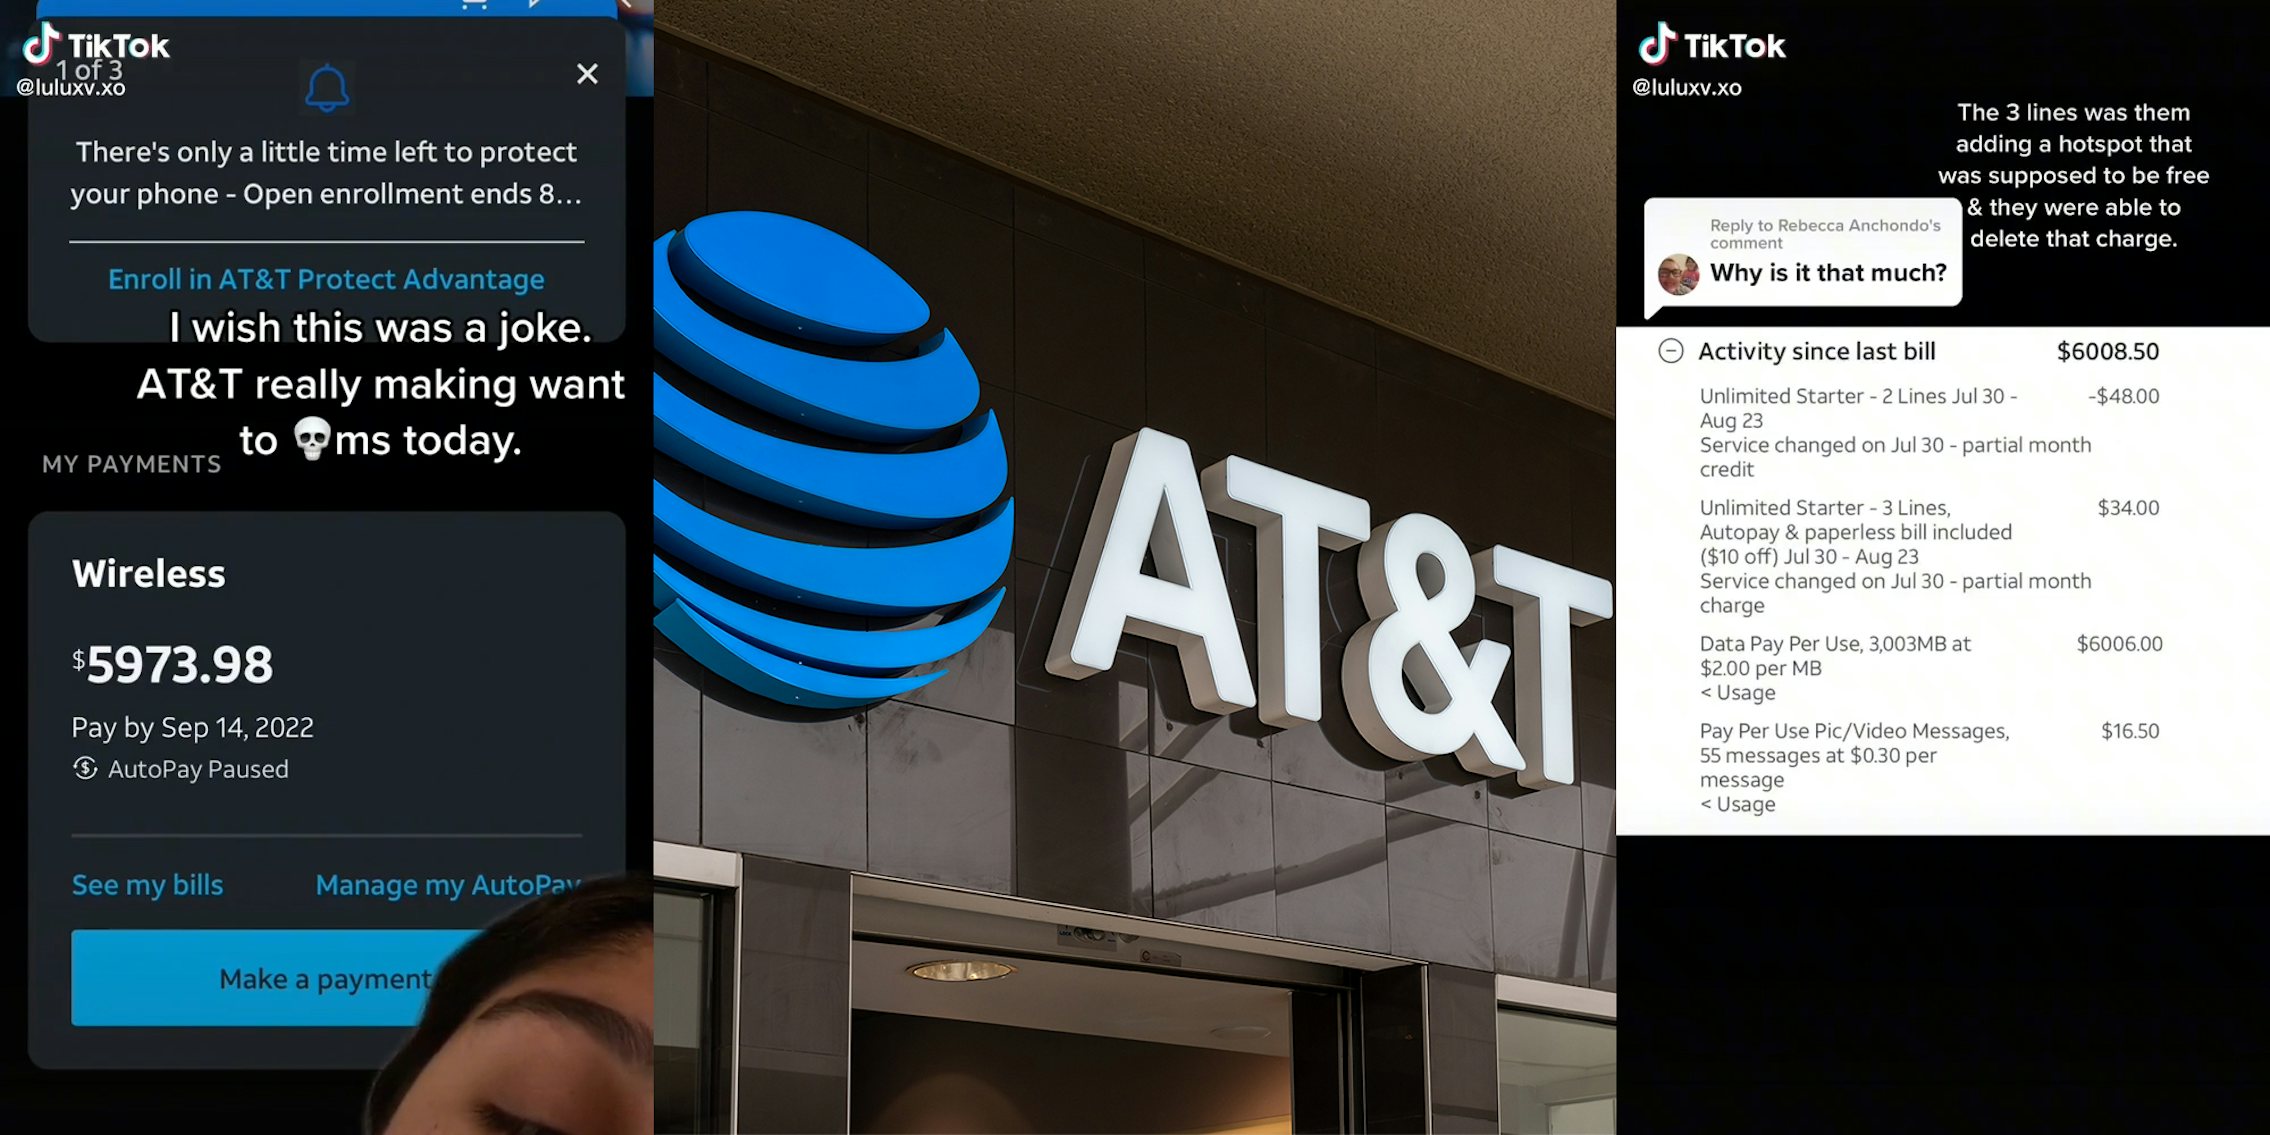 AT&T payment screen (l) AT&T storefront (c) 'Activity since last bill' screen with caption 'Why is it that much?' (r)